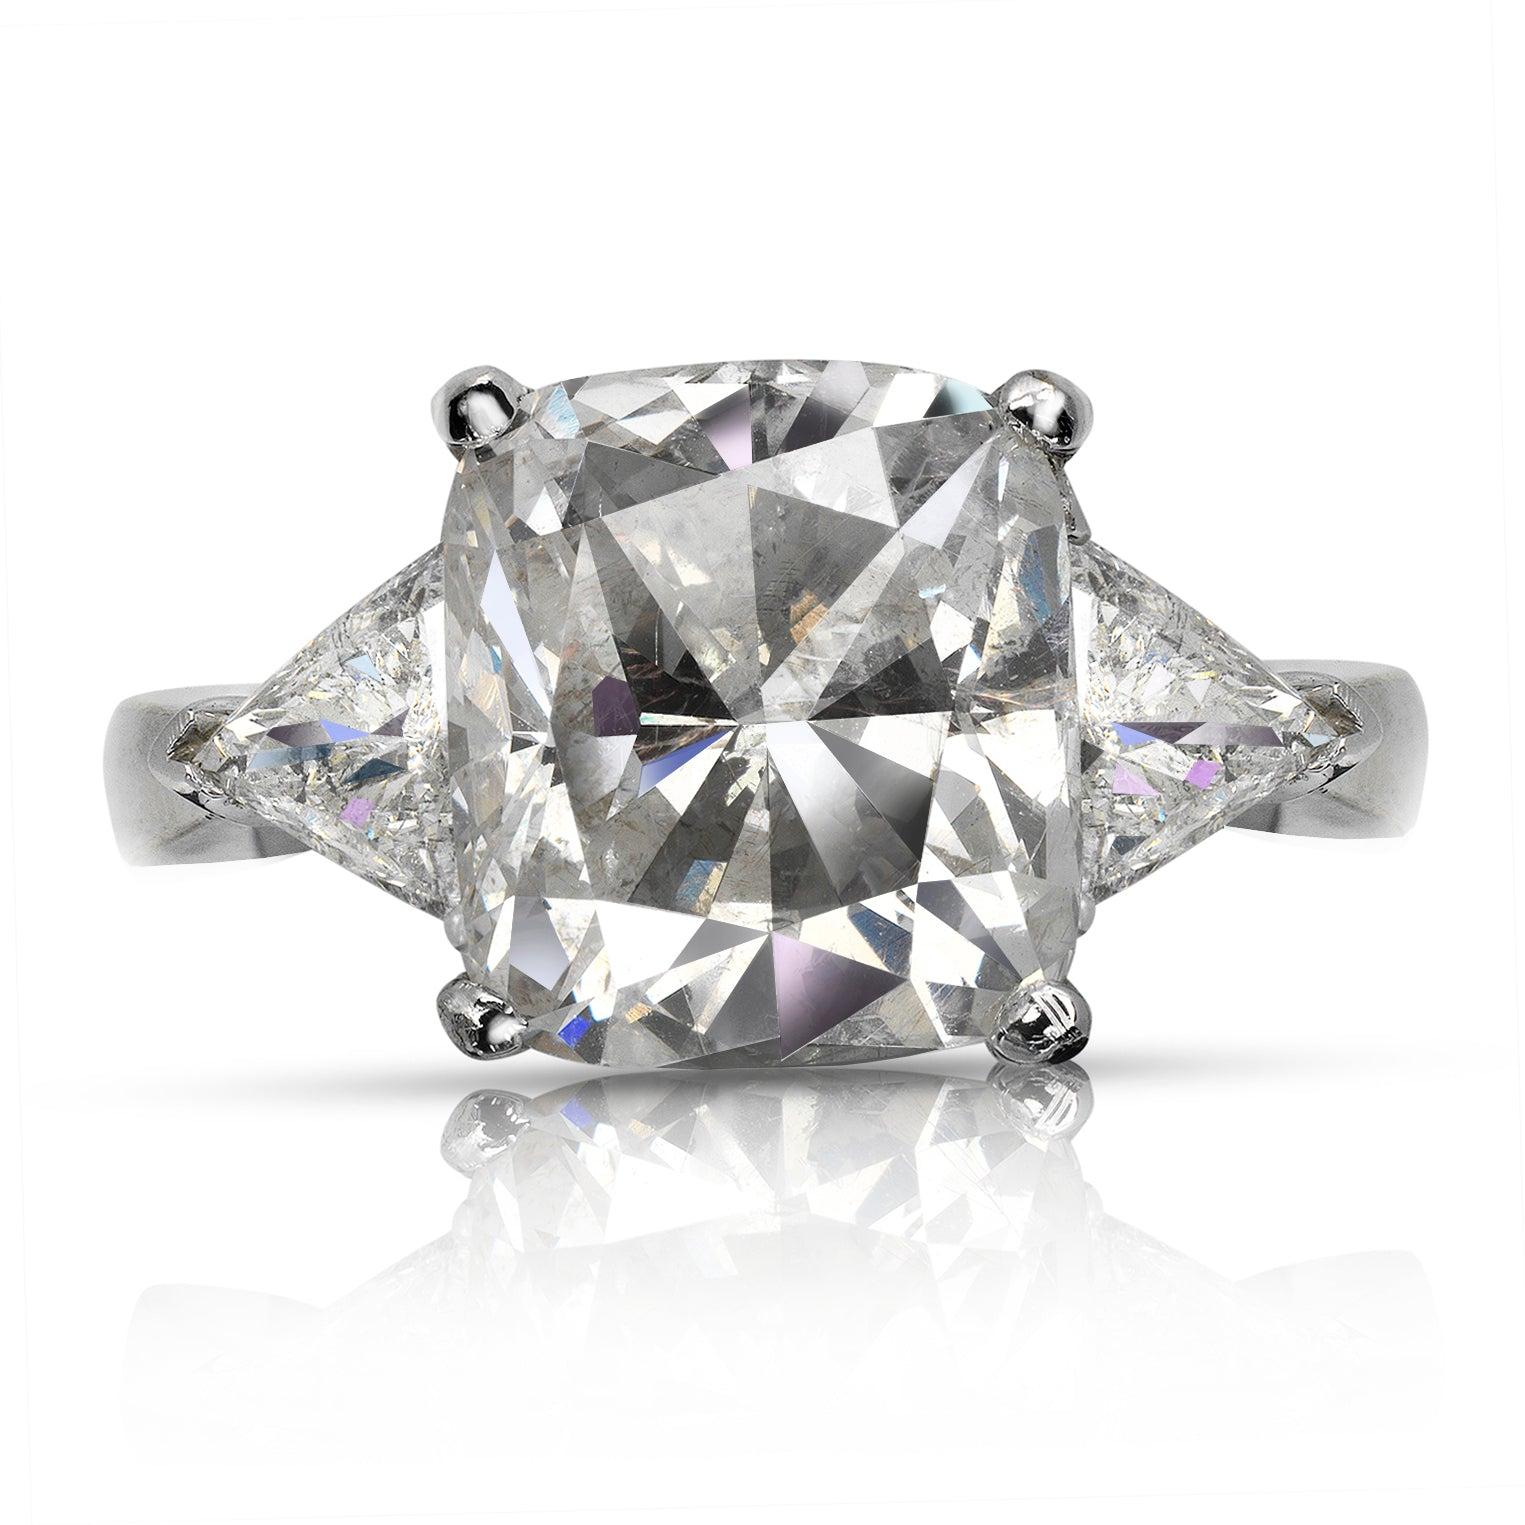 LYS -CUSHION CUT THREE STONE TRILLION  DIAMOND ENGAGEMENT RING  BY MIKE NEKTA 
CERTIFIED 
Center Diamond:

Carat Weight: 6.2 Carats
Color : H
Clarity: SI1*
Style: CUSHION CUT
Approximate Measurements: 10.9 x 9.8 x 6.9 mm
* Clarity Enhanced 
